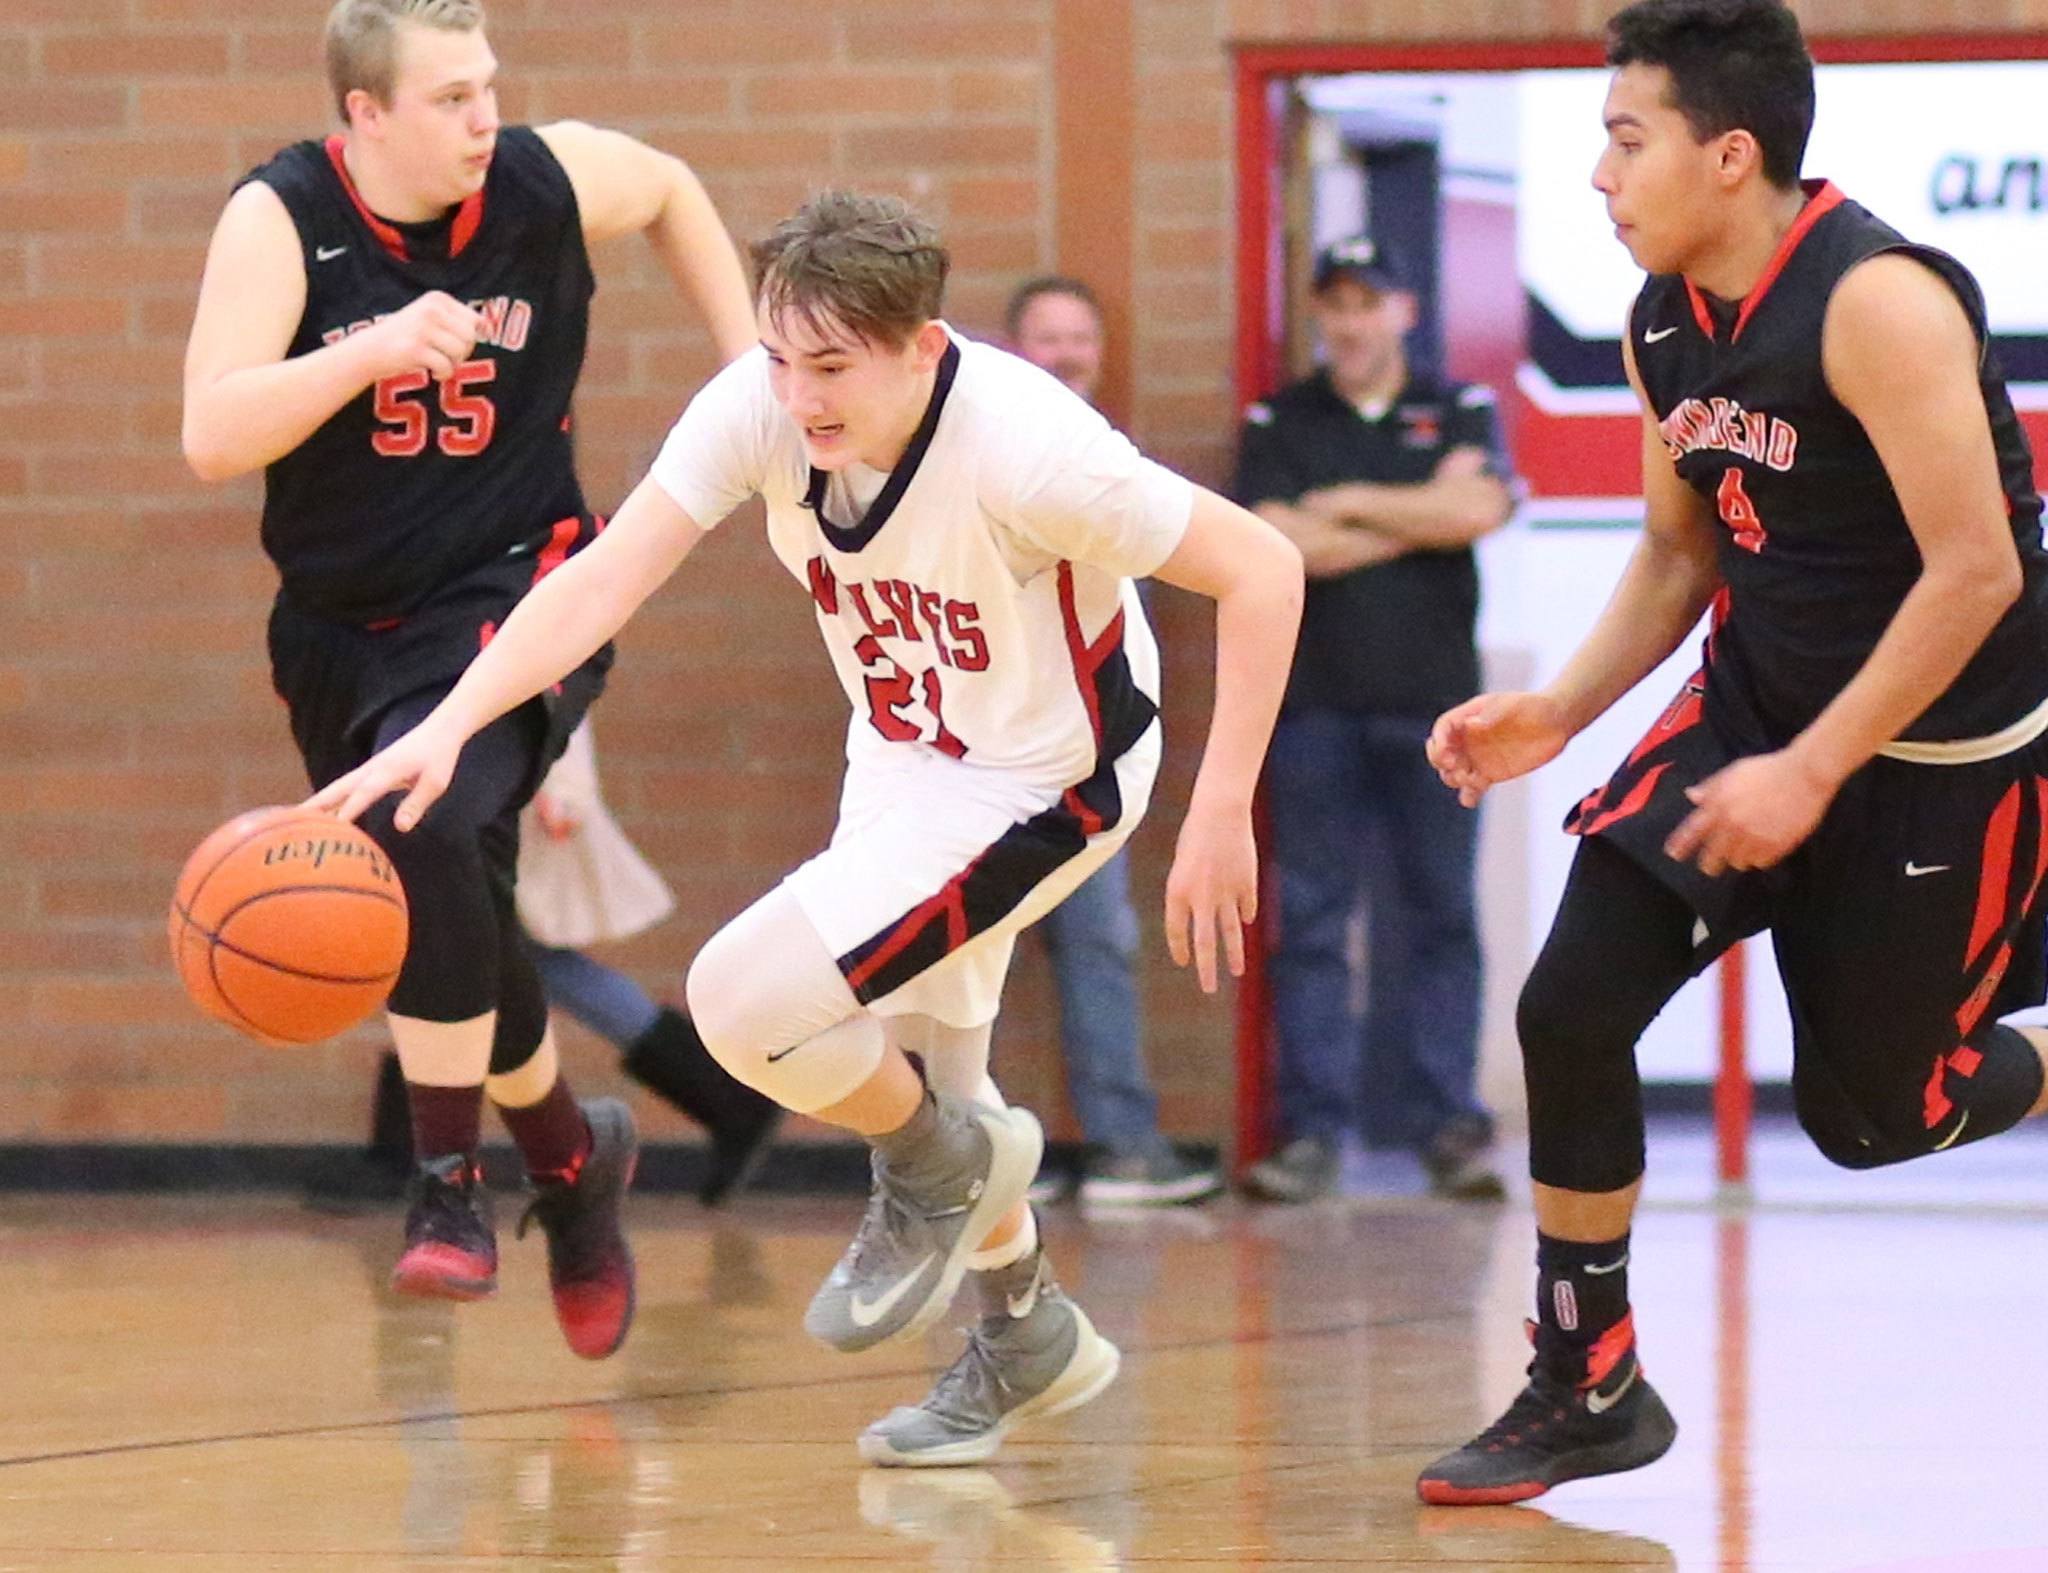 Ethan Spark races up the court by Port Townsend’s Kaiden Parcher (55) and Jacob Boucher. (Photo by John Fisken)